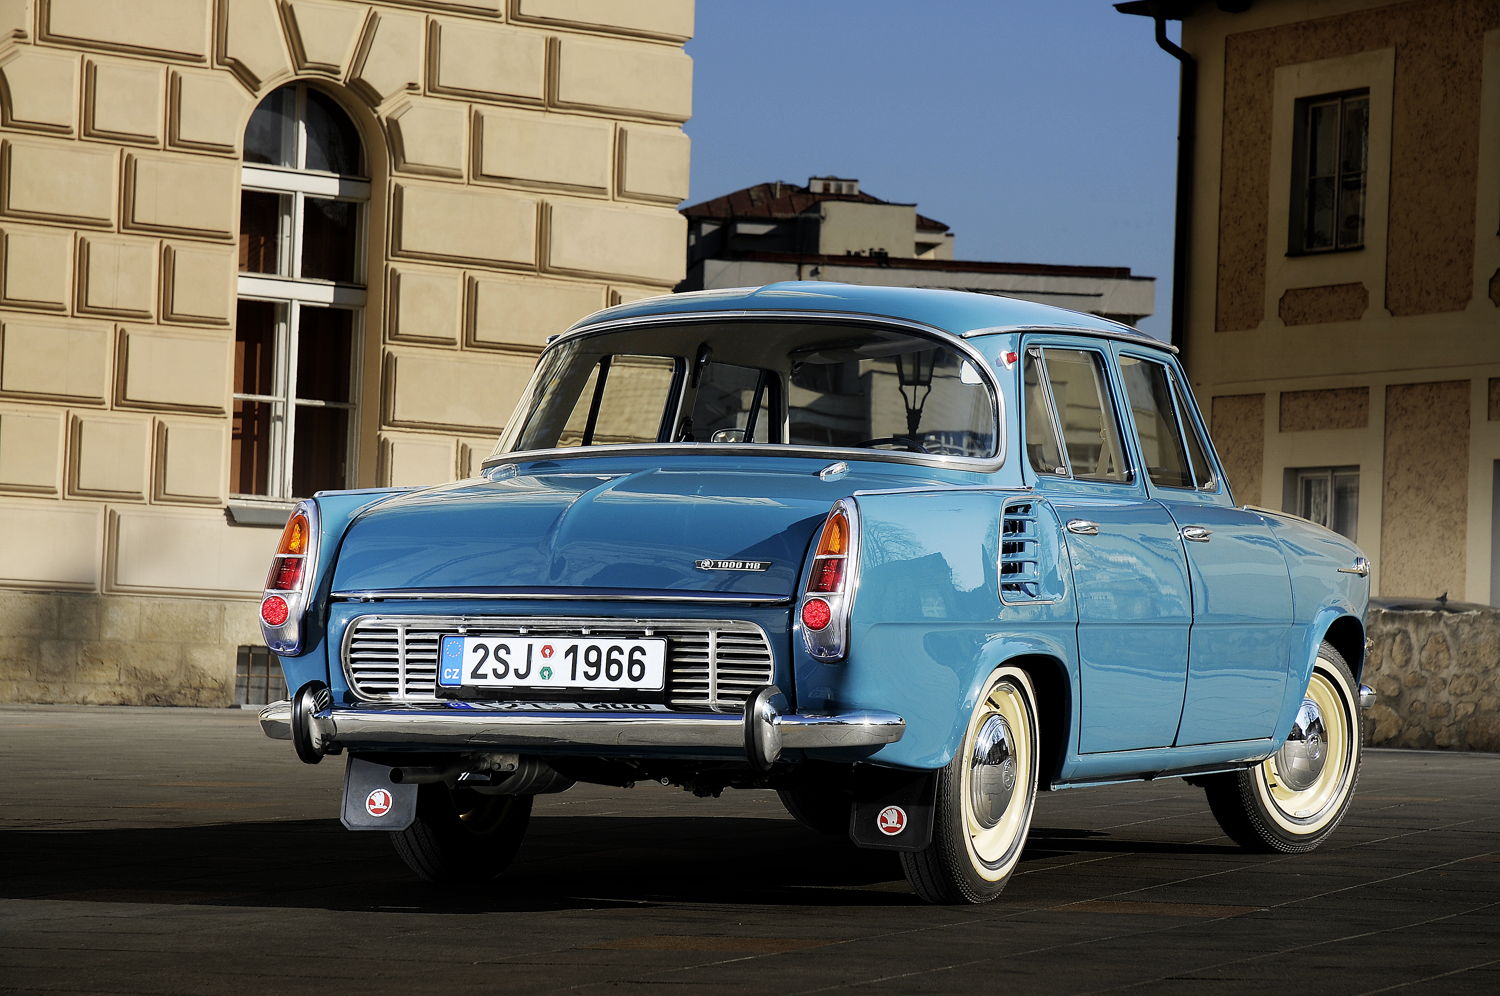 With advanced technology, comfort and design, the
Š 1000 MB set new standards in the mid-1960s. ŠKODA
comprehensively expanded its main plant in Mladá
Boleslav to manufacture it.